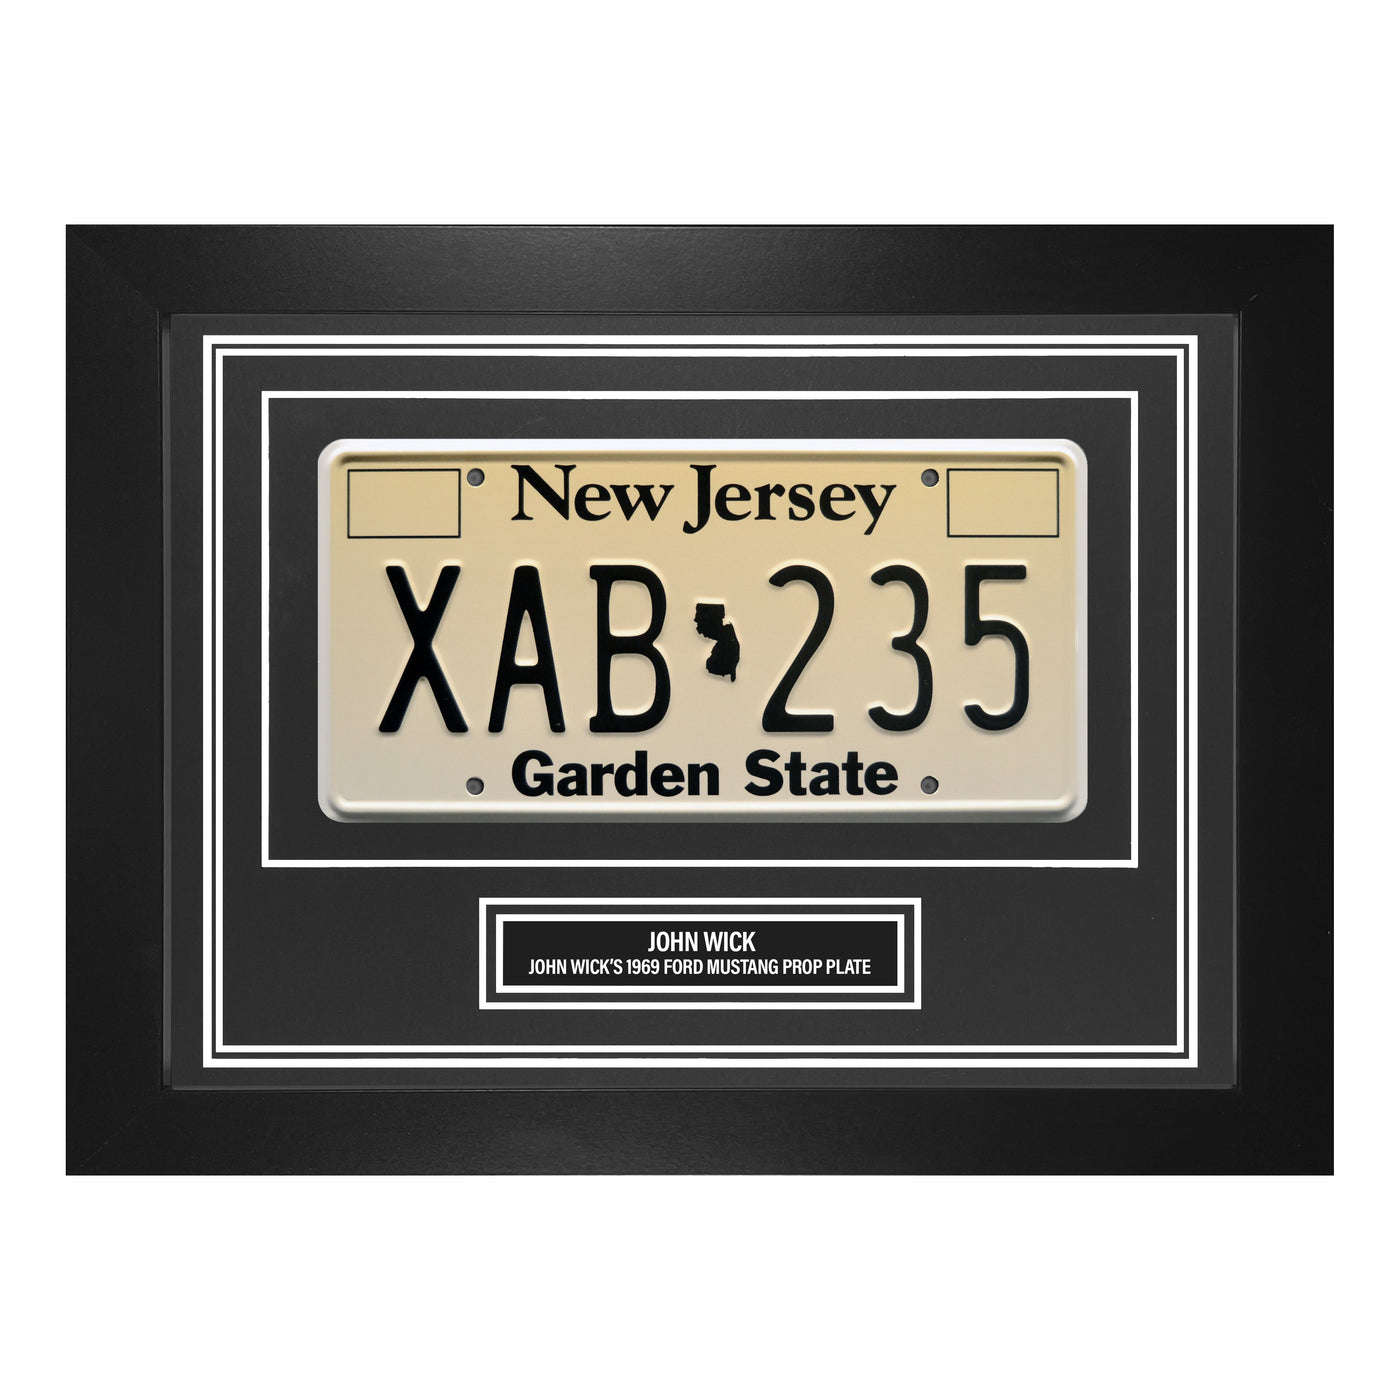 John Wick License Plate Wall Display New Jersey 1969 Ford Mustang Prop Frame